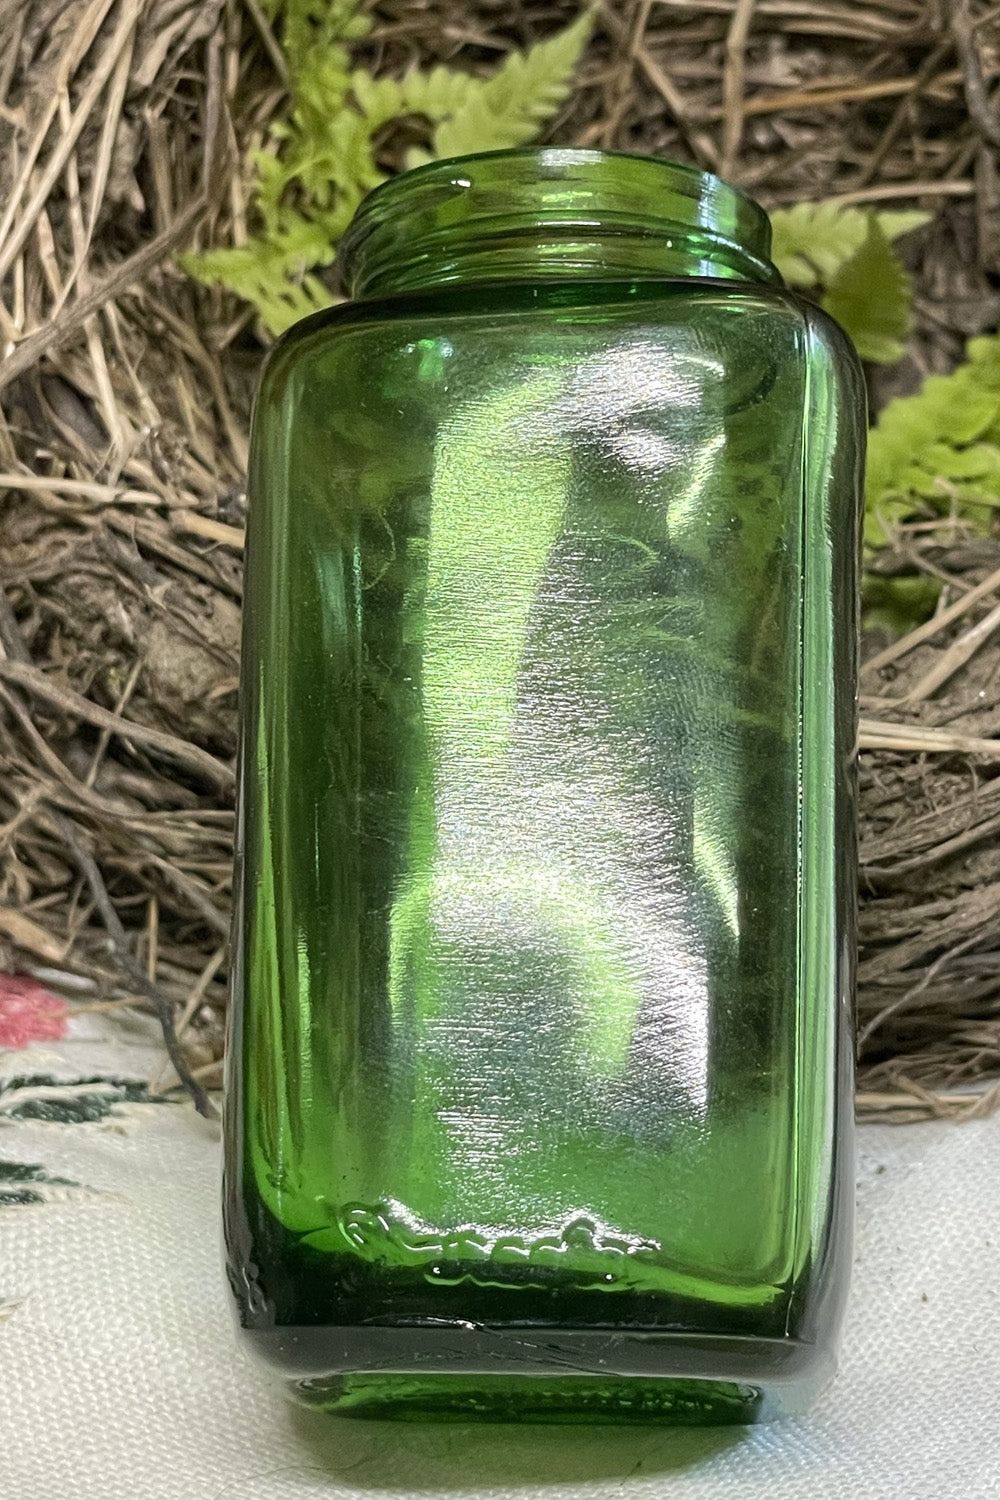 VINTAGE 1940'S CLEAR GLASS MEDICINE BOTTLE MADE BY GLASS